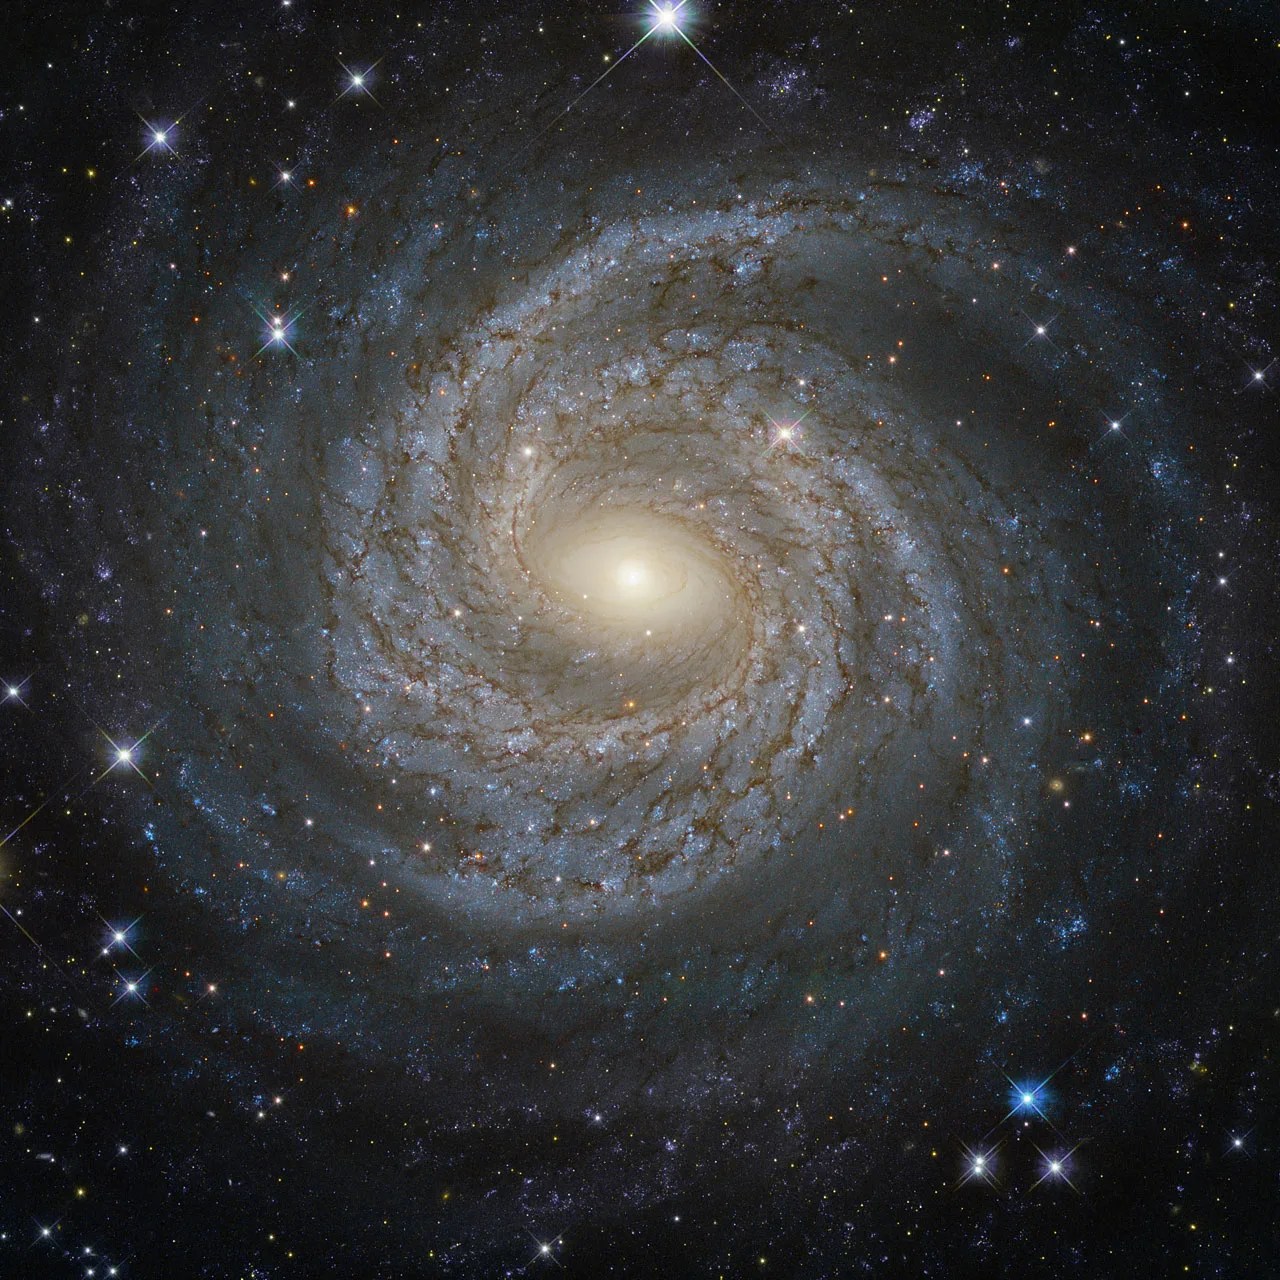 Spiral galaxy ngc 6814 with luminous arms and dark dust